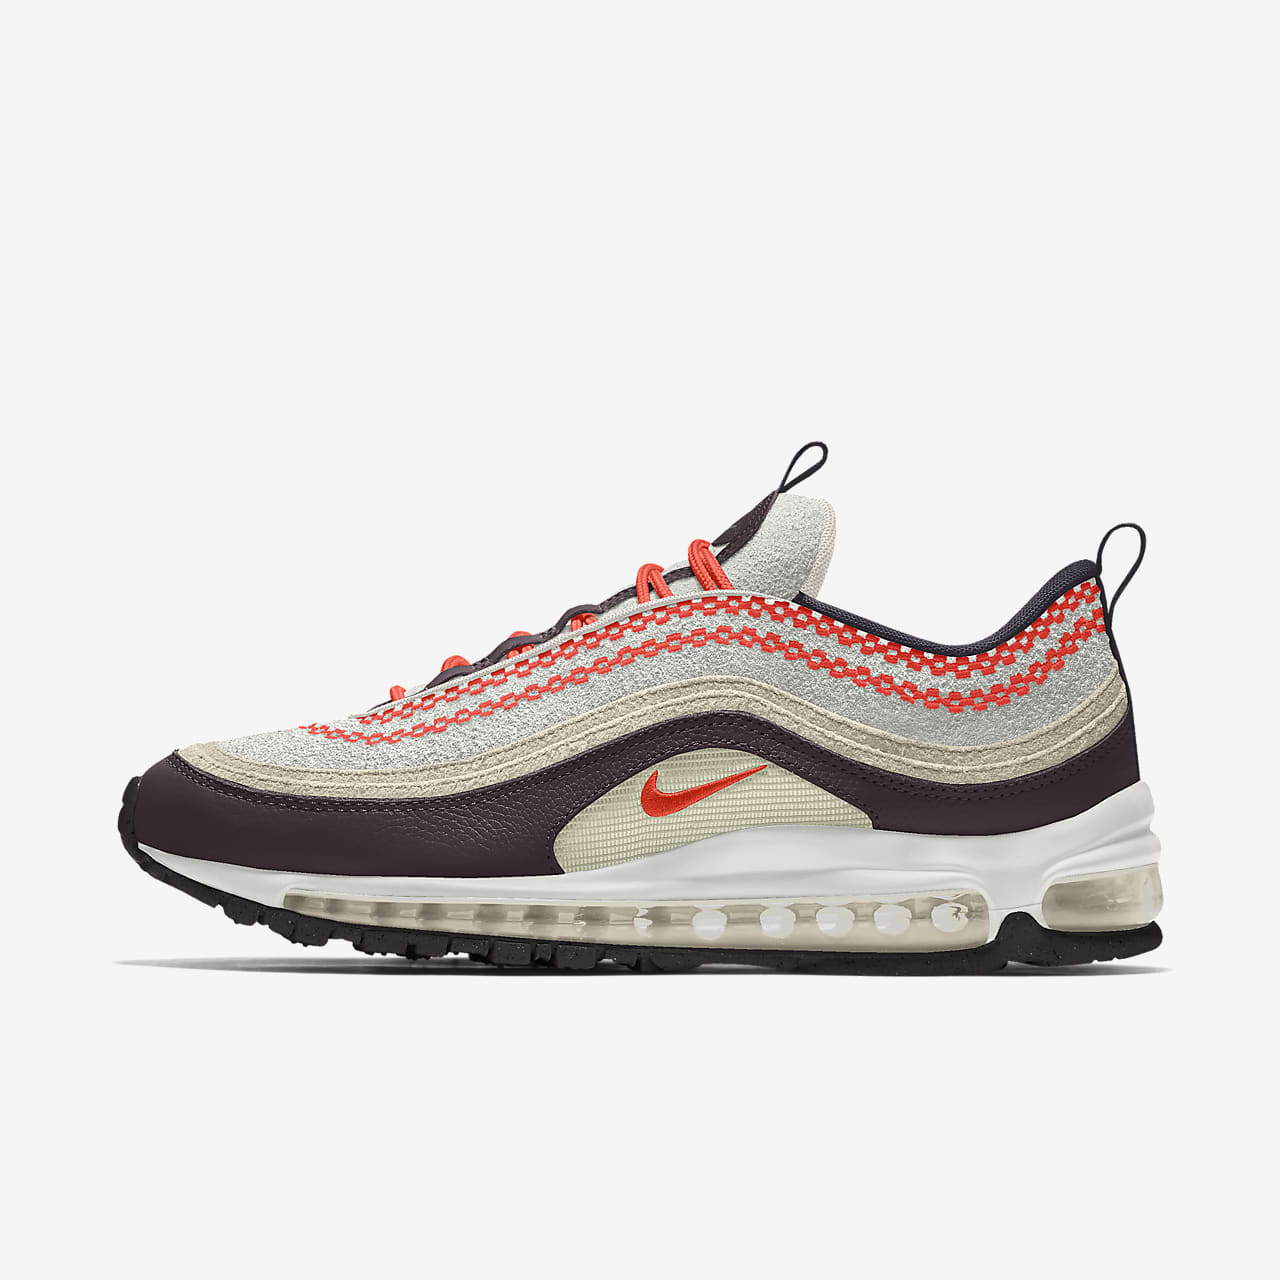 Sapatilhas personalizáveis Nike Air Max 97 Unlocked By You para mulher